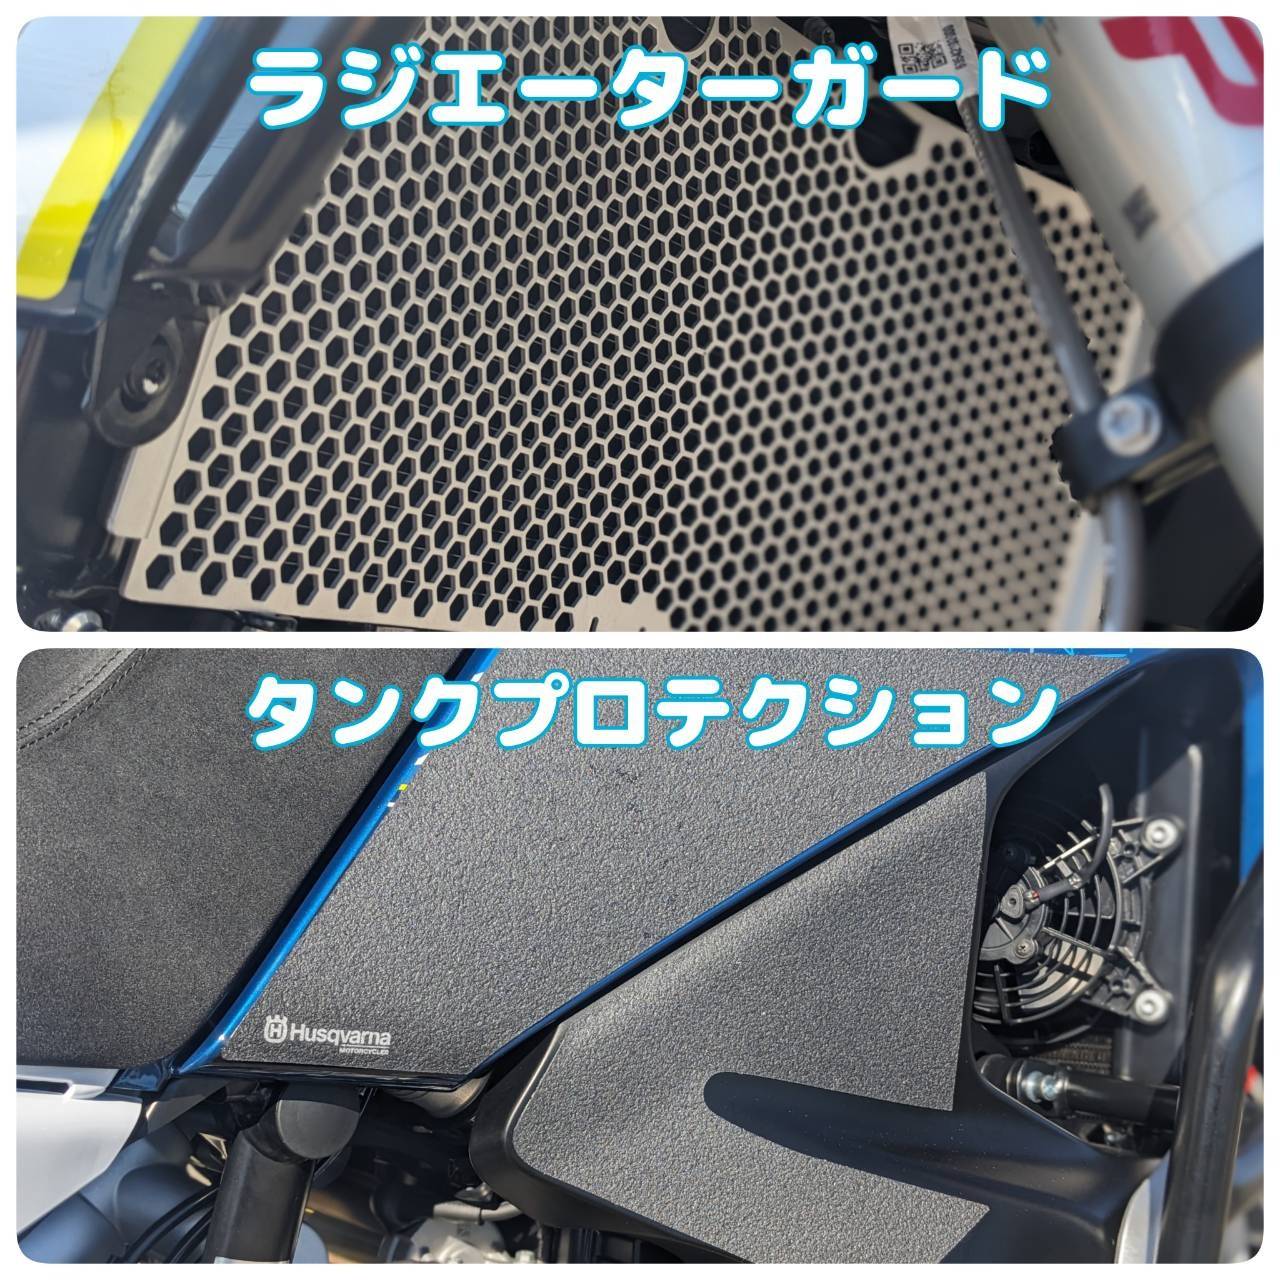 Norden901Expeditionカスタム紹介♪① ハスクバーナモーターサイクルズ 山形